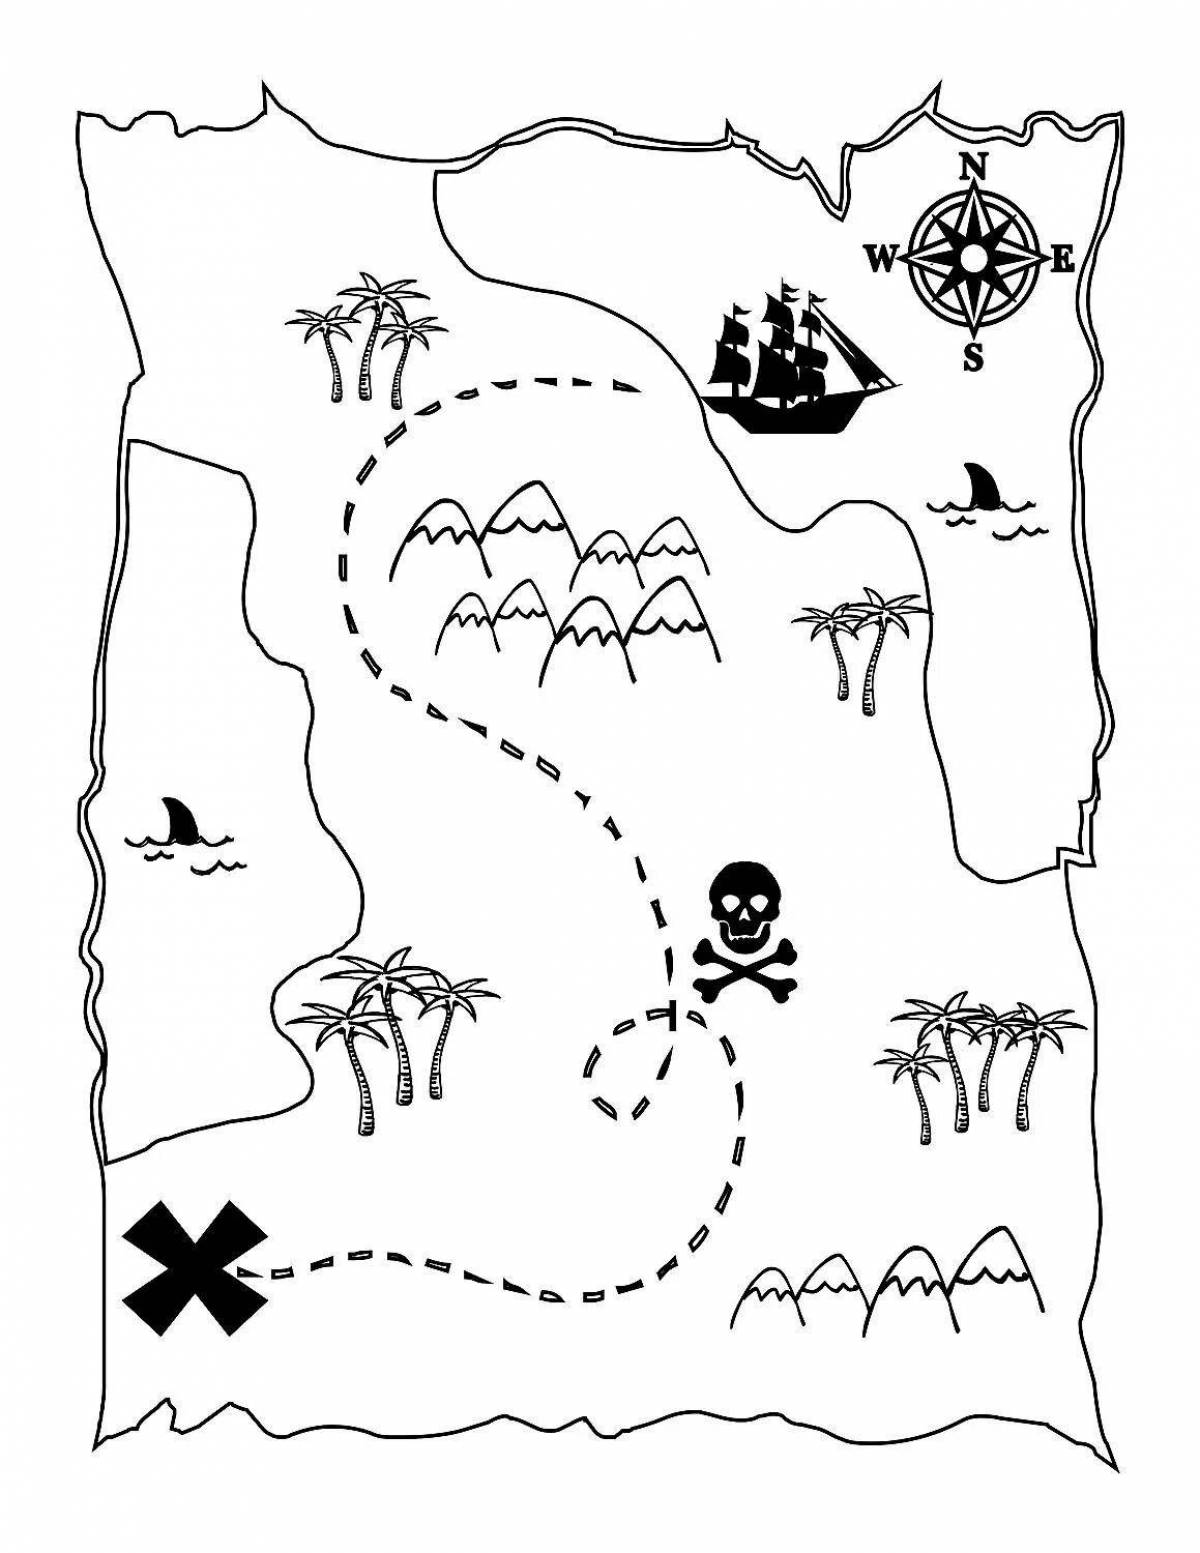 Animated Pirate Map Coloring Page